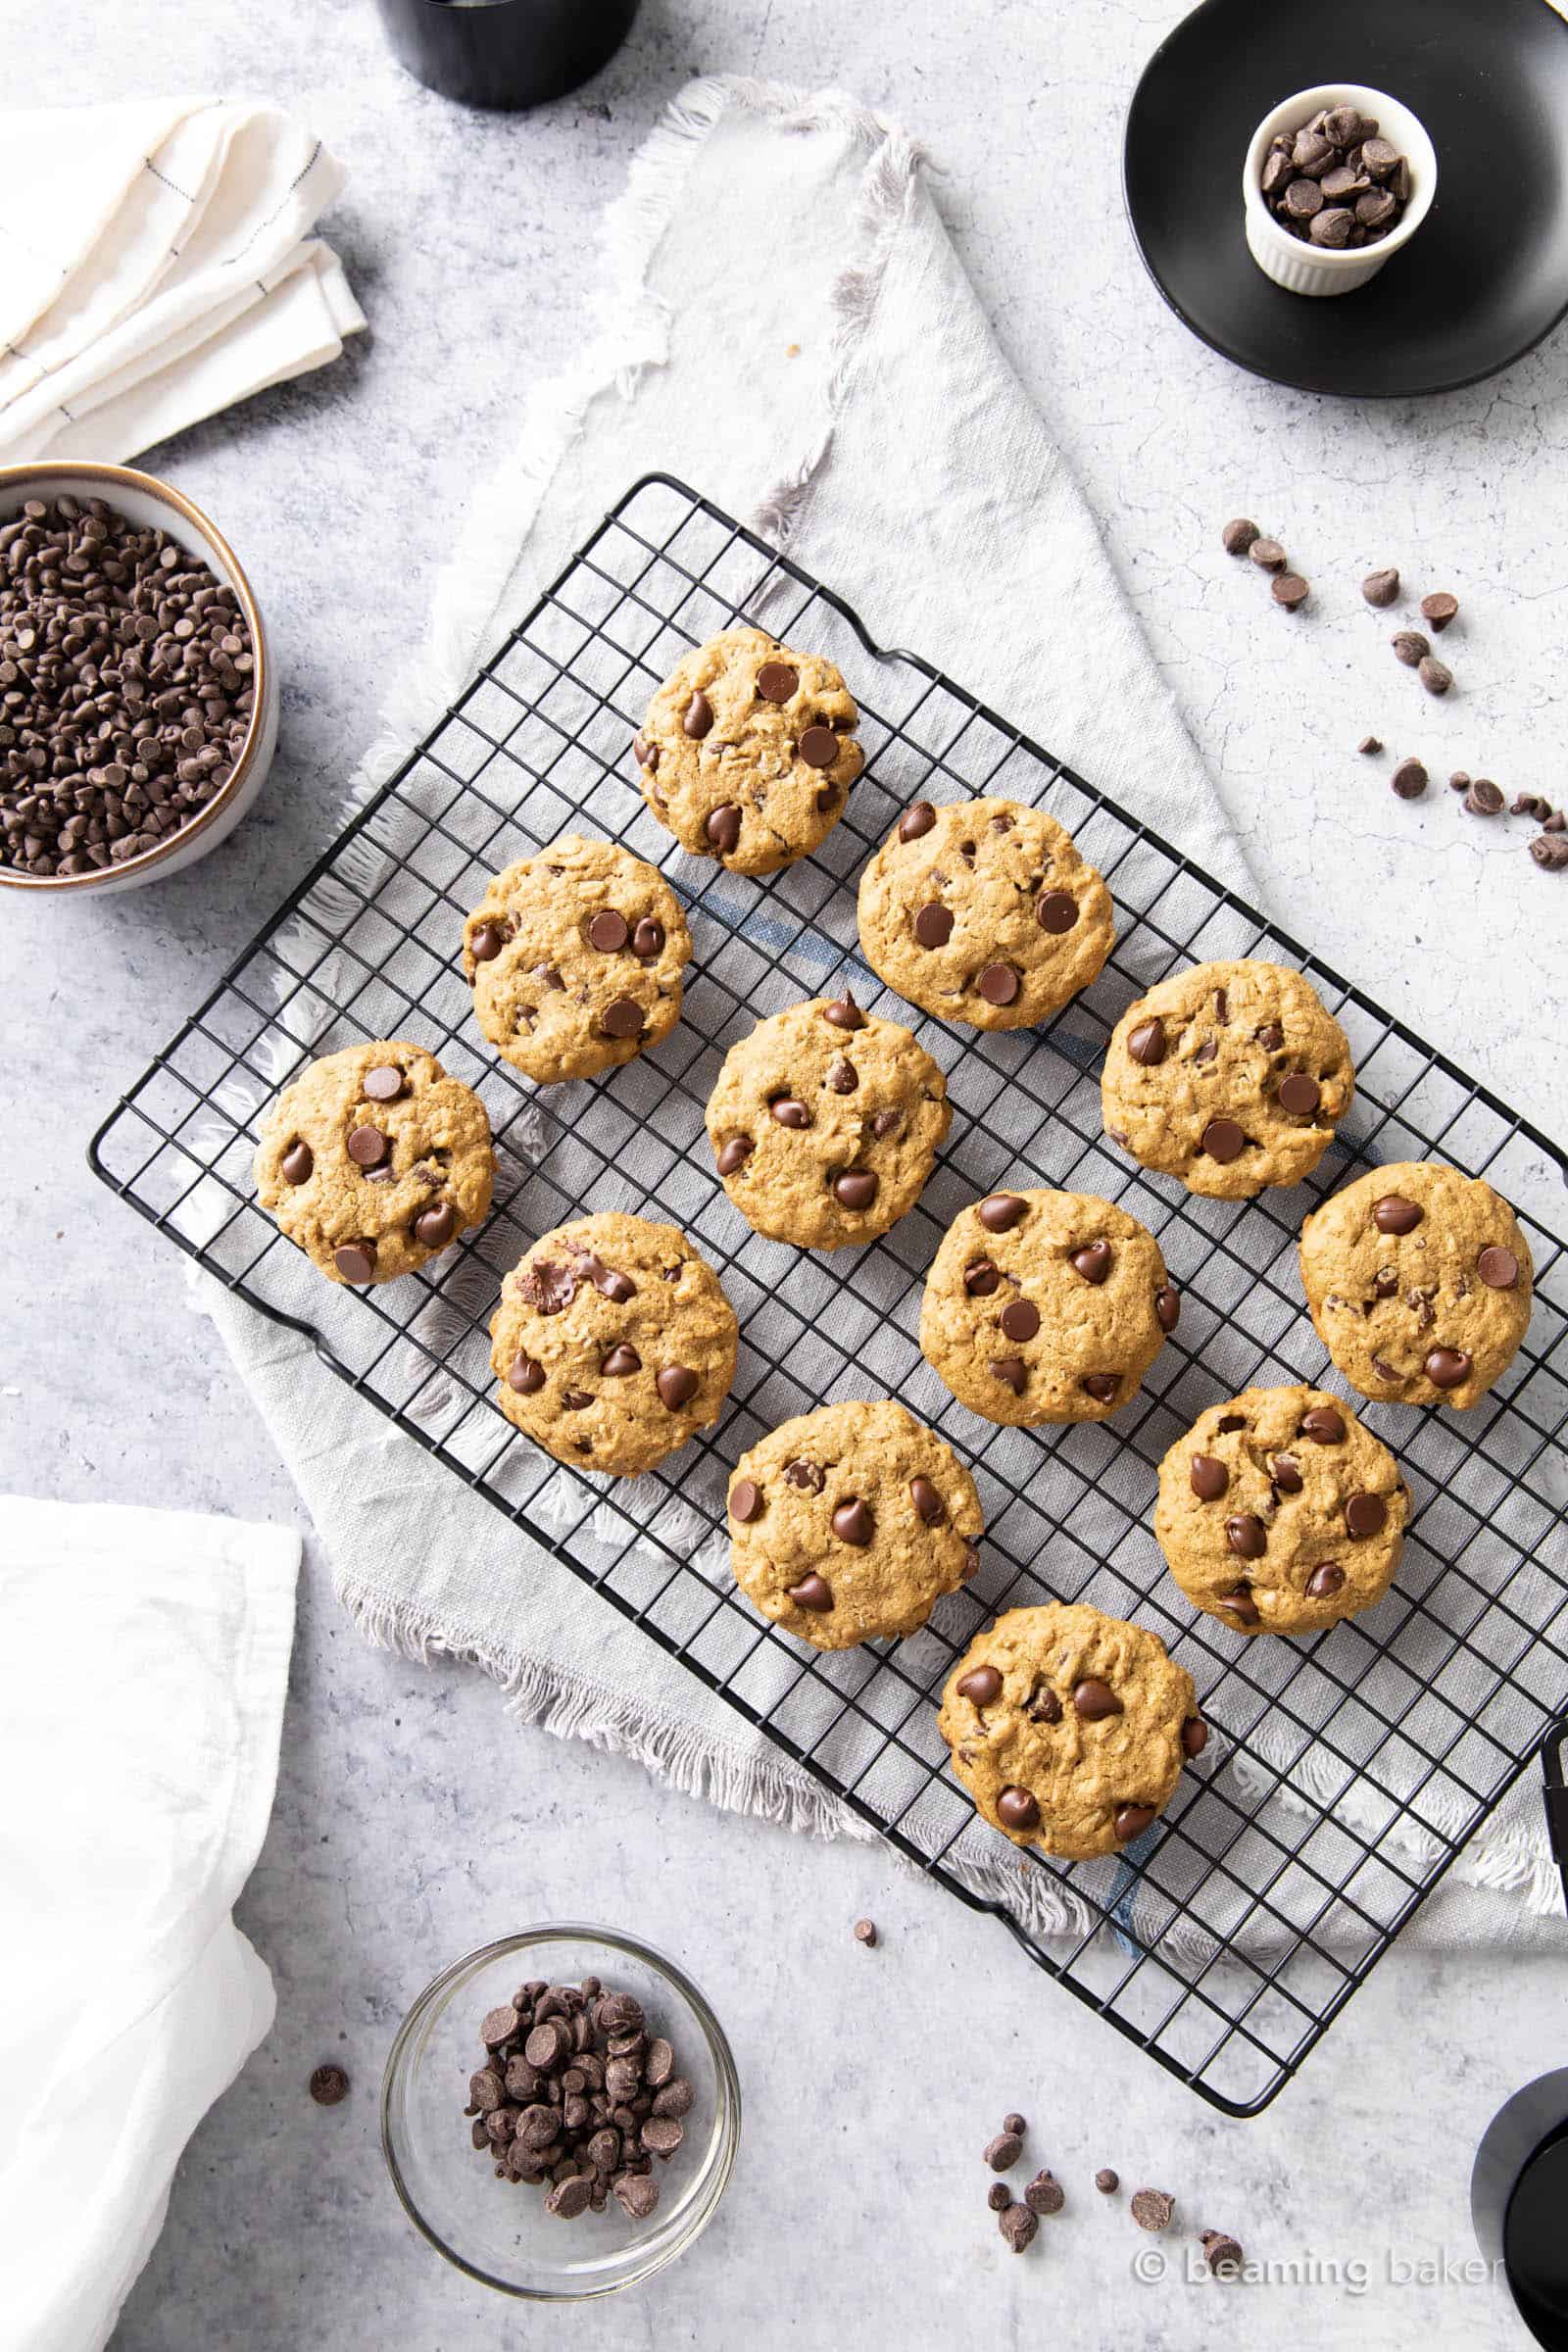 fresh baked oat flour cookies with chocolate chips in bowls and kitchen towels